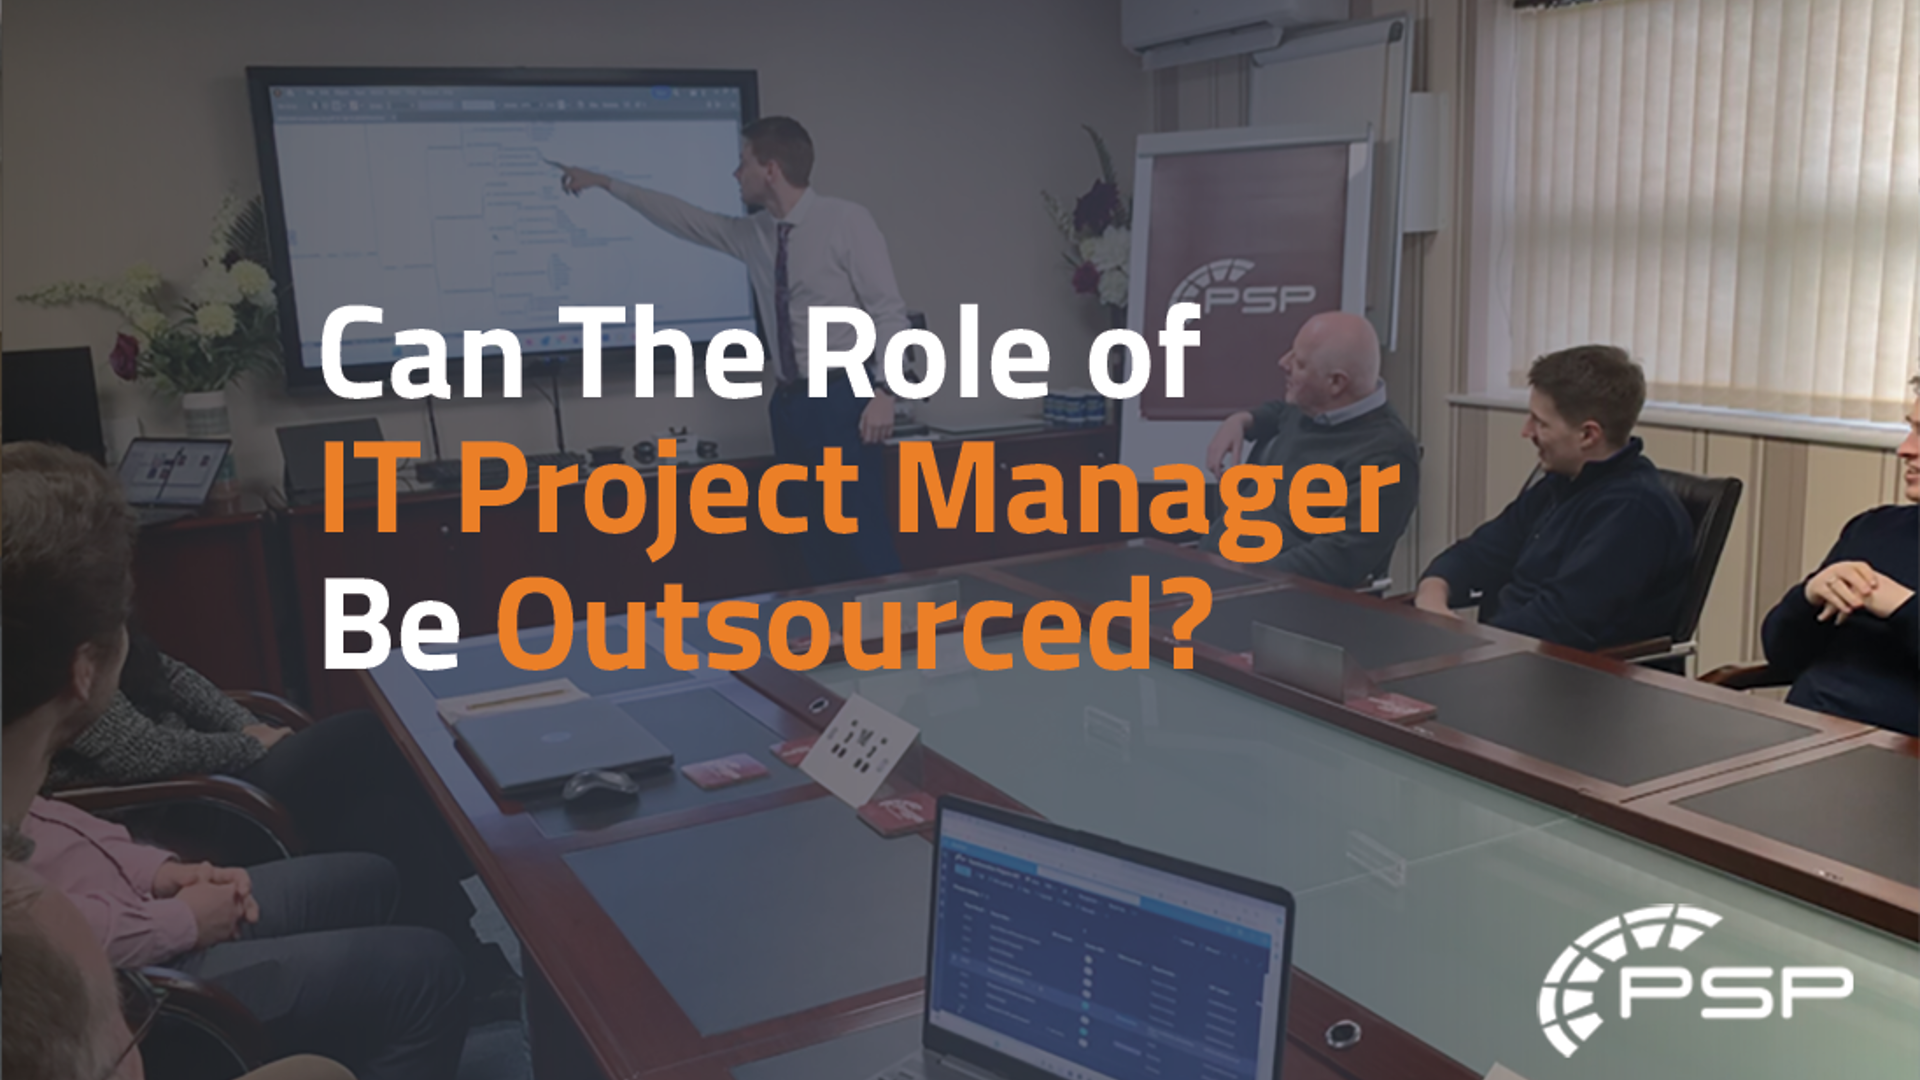 Can the role of an IT project manager be outsourced?